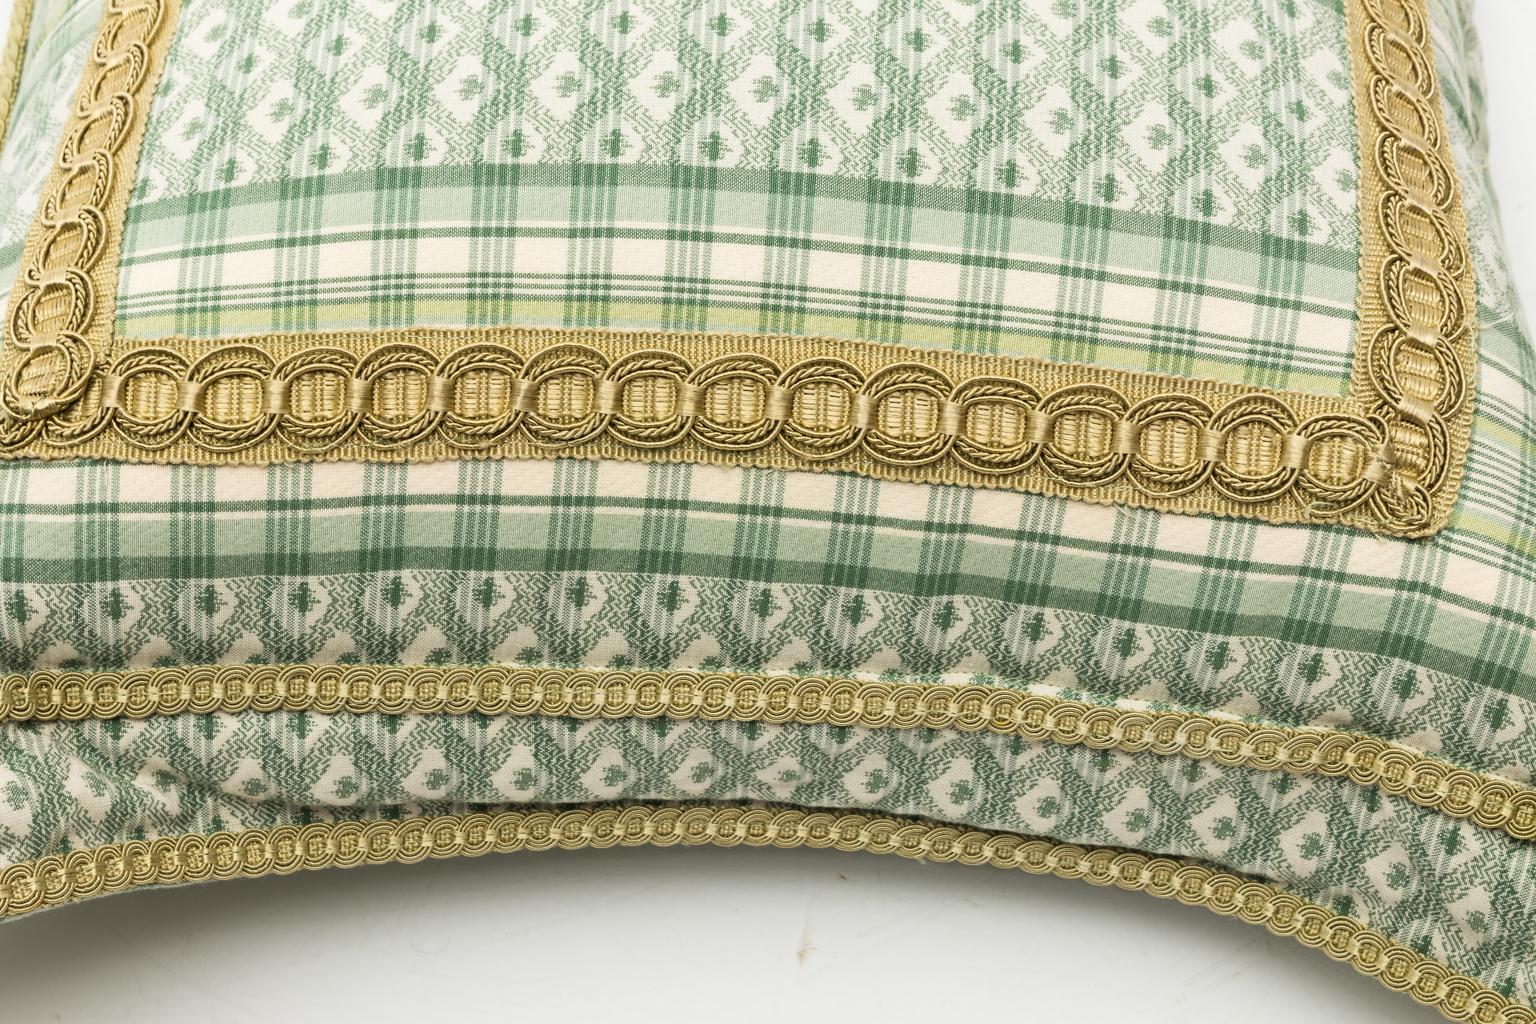 Decorative Green and White Pillows 2